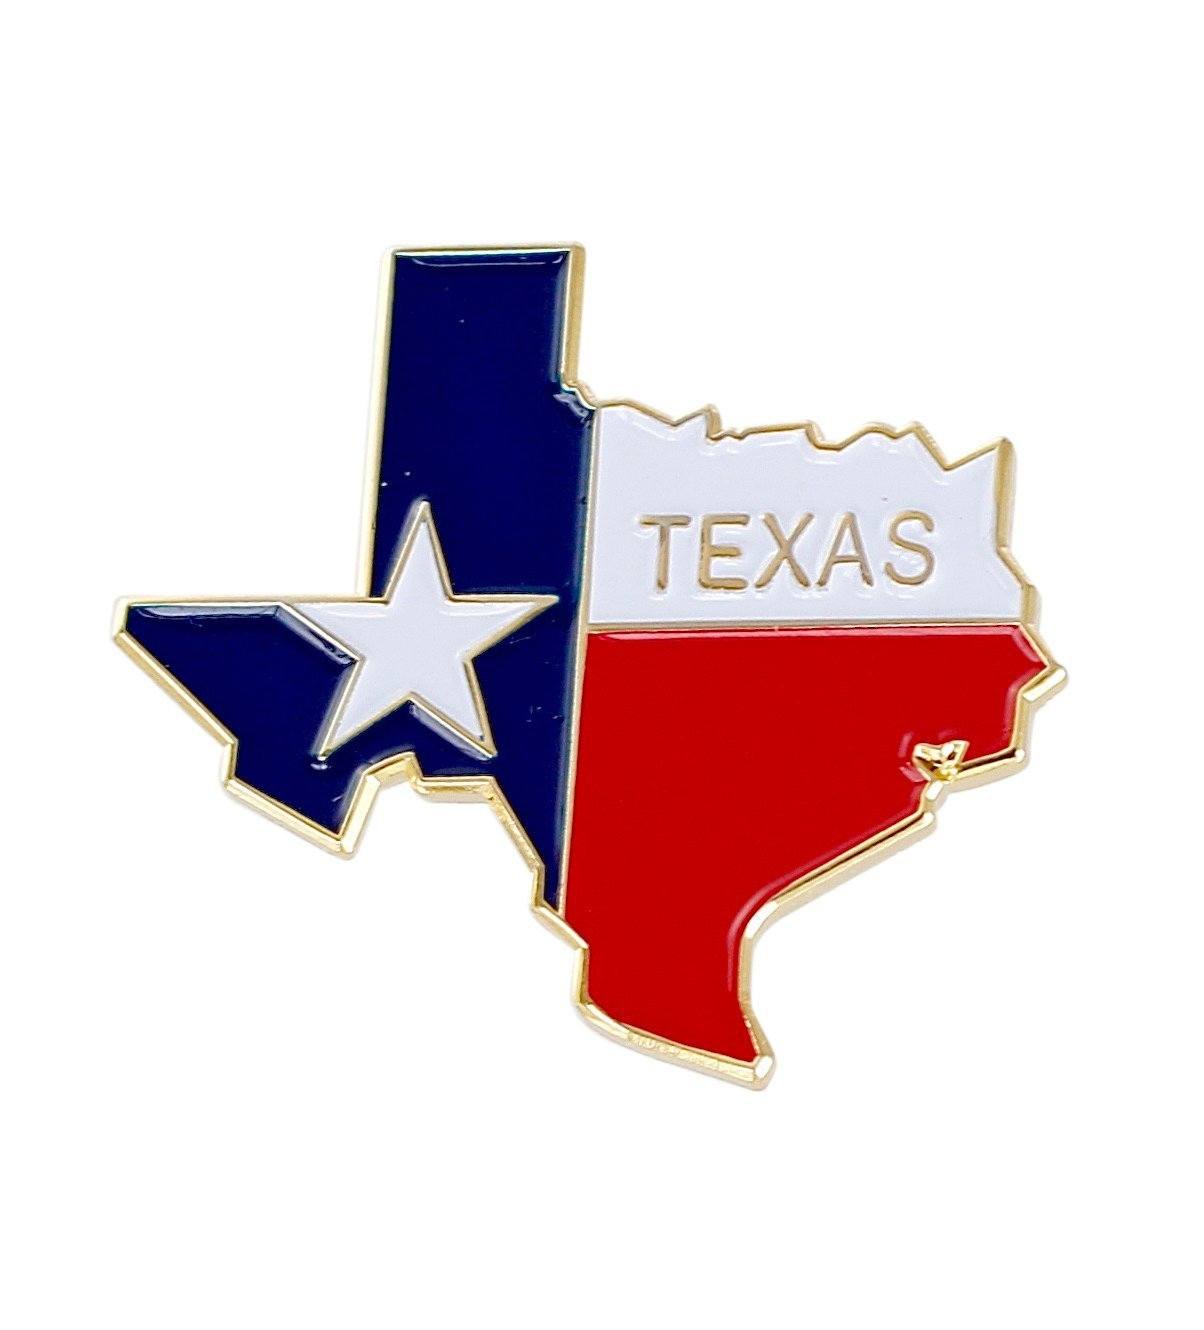 State Shape of Texas and Texas Flag Lapel Pin Pin WizardPins 100 Pins 